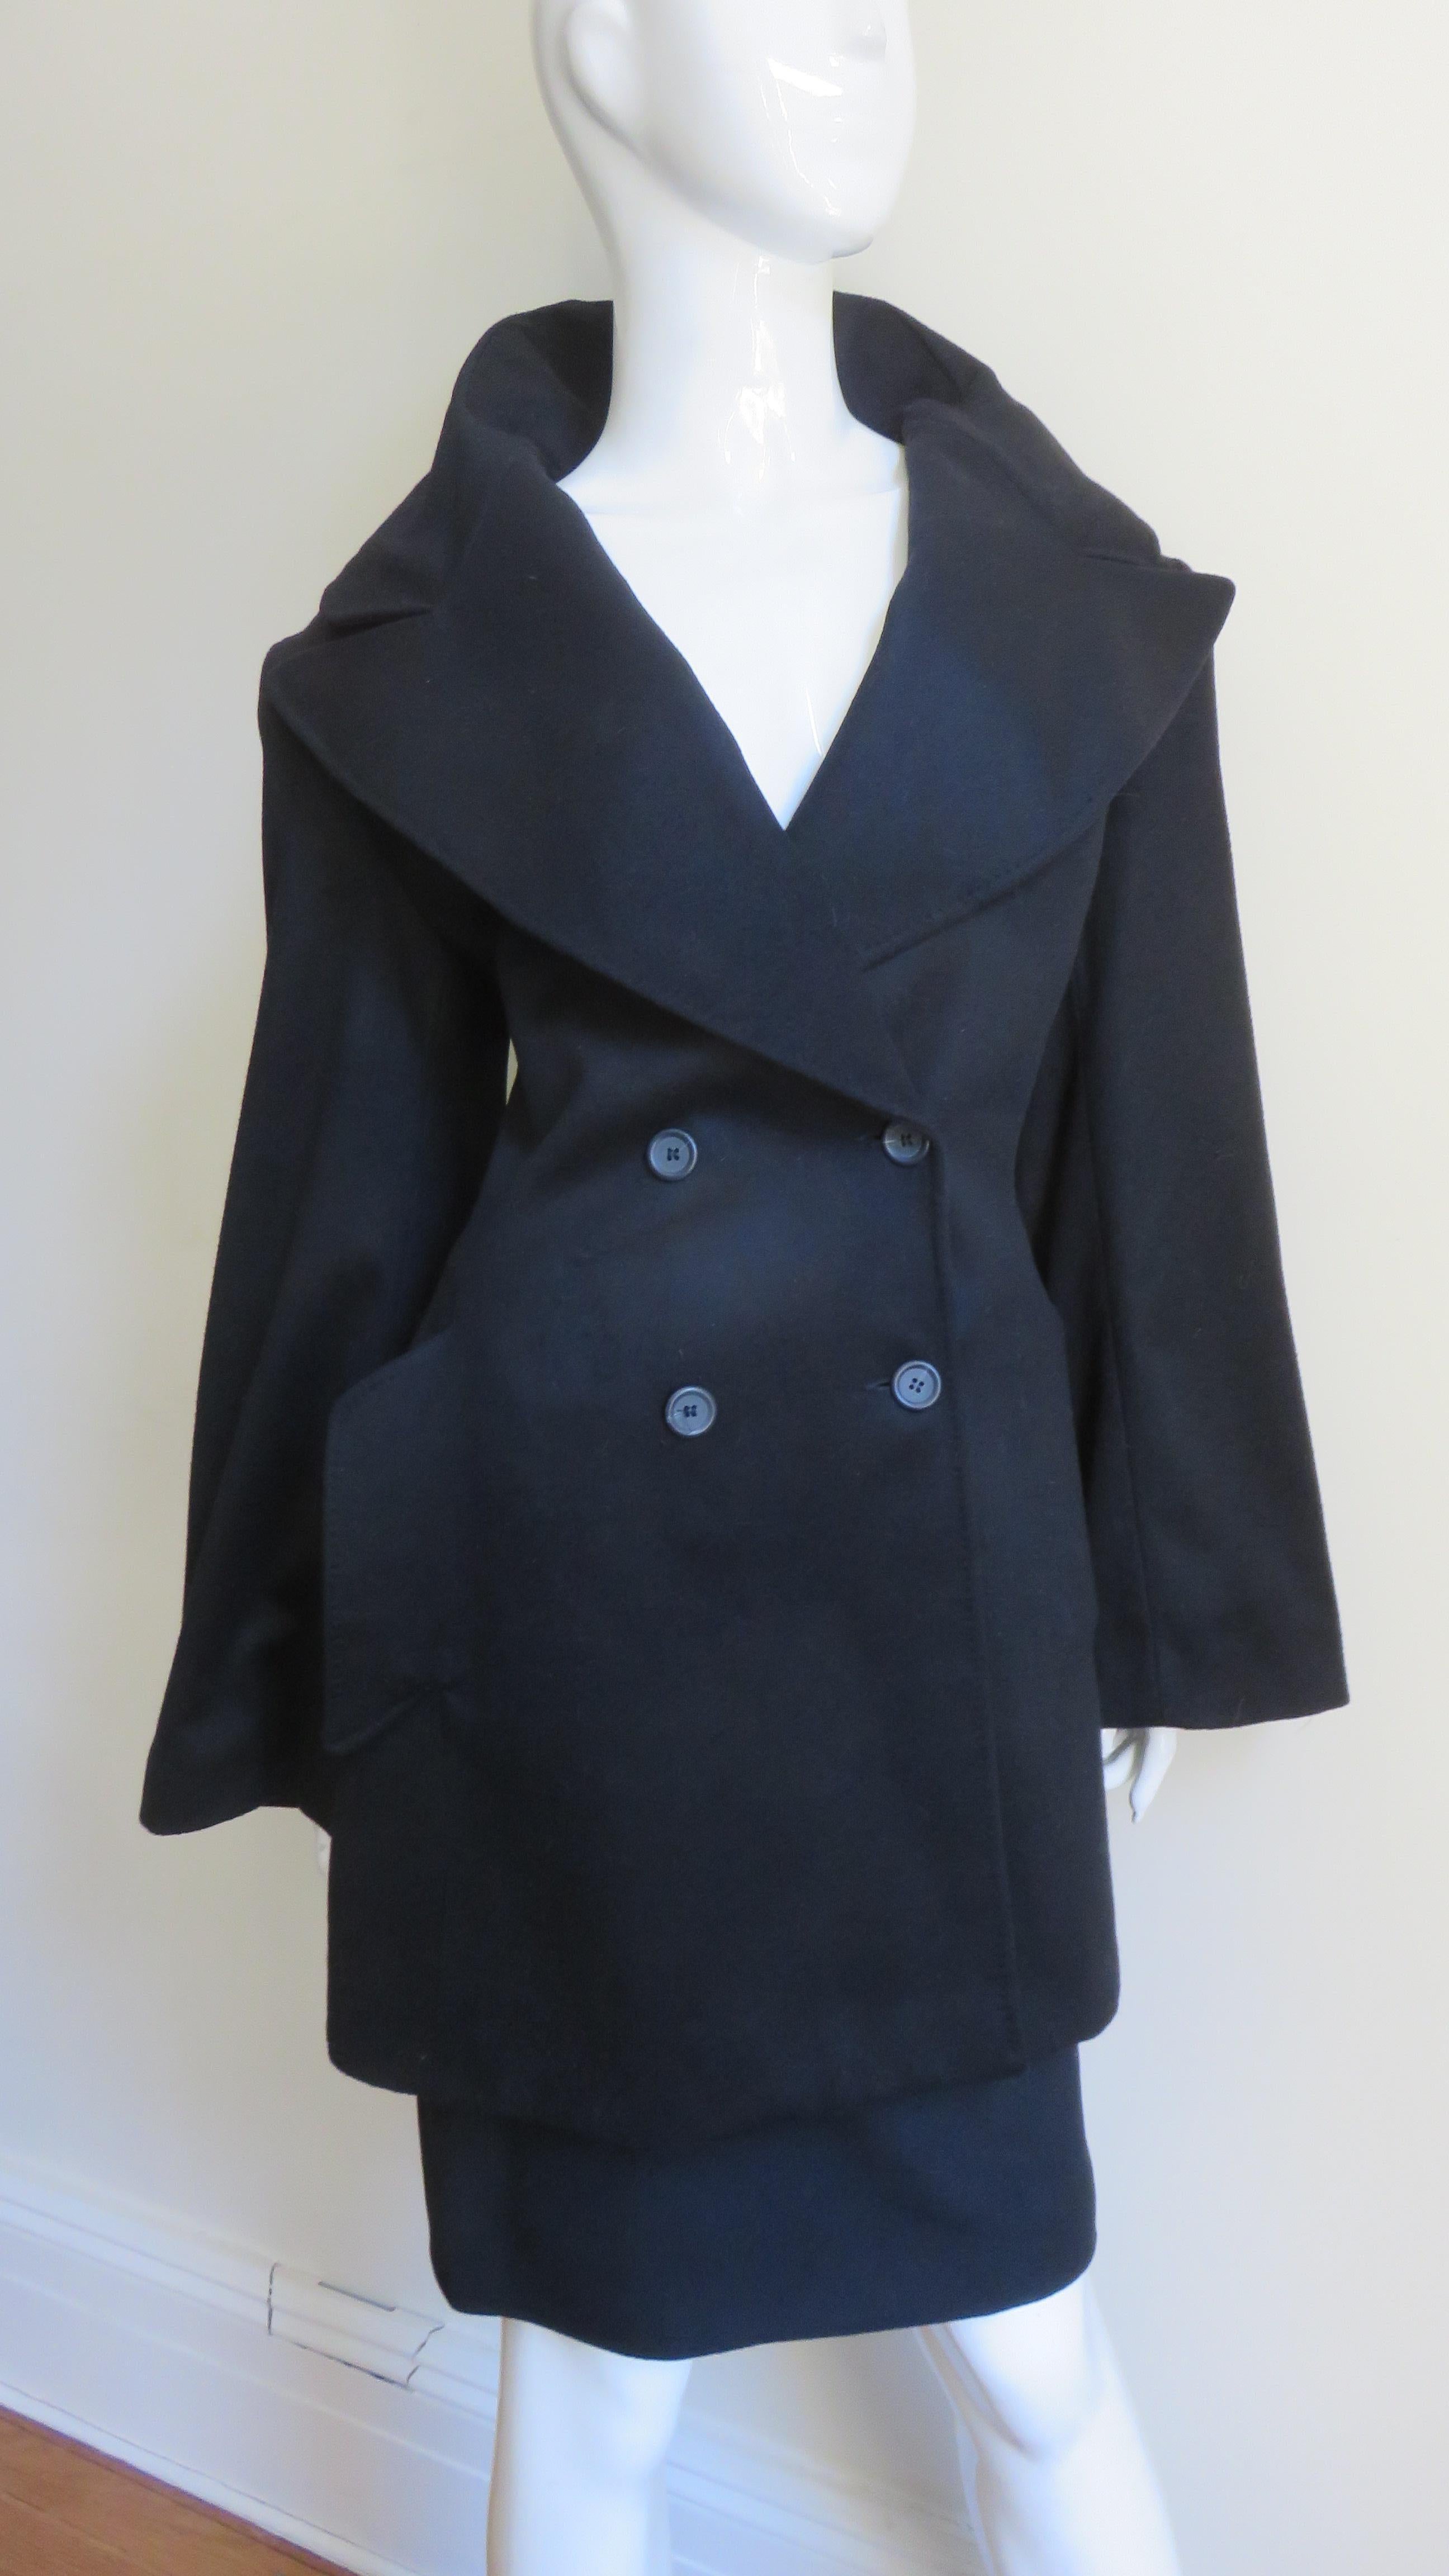 Black Alexander McQueen New Cashmere Popped Lapel Collar Jacket and Skirt A/W 1999 For Sale